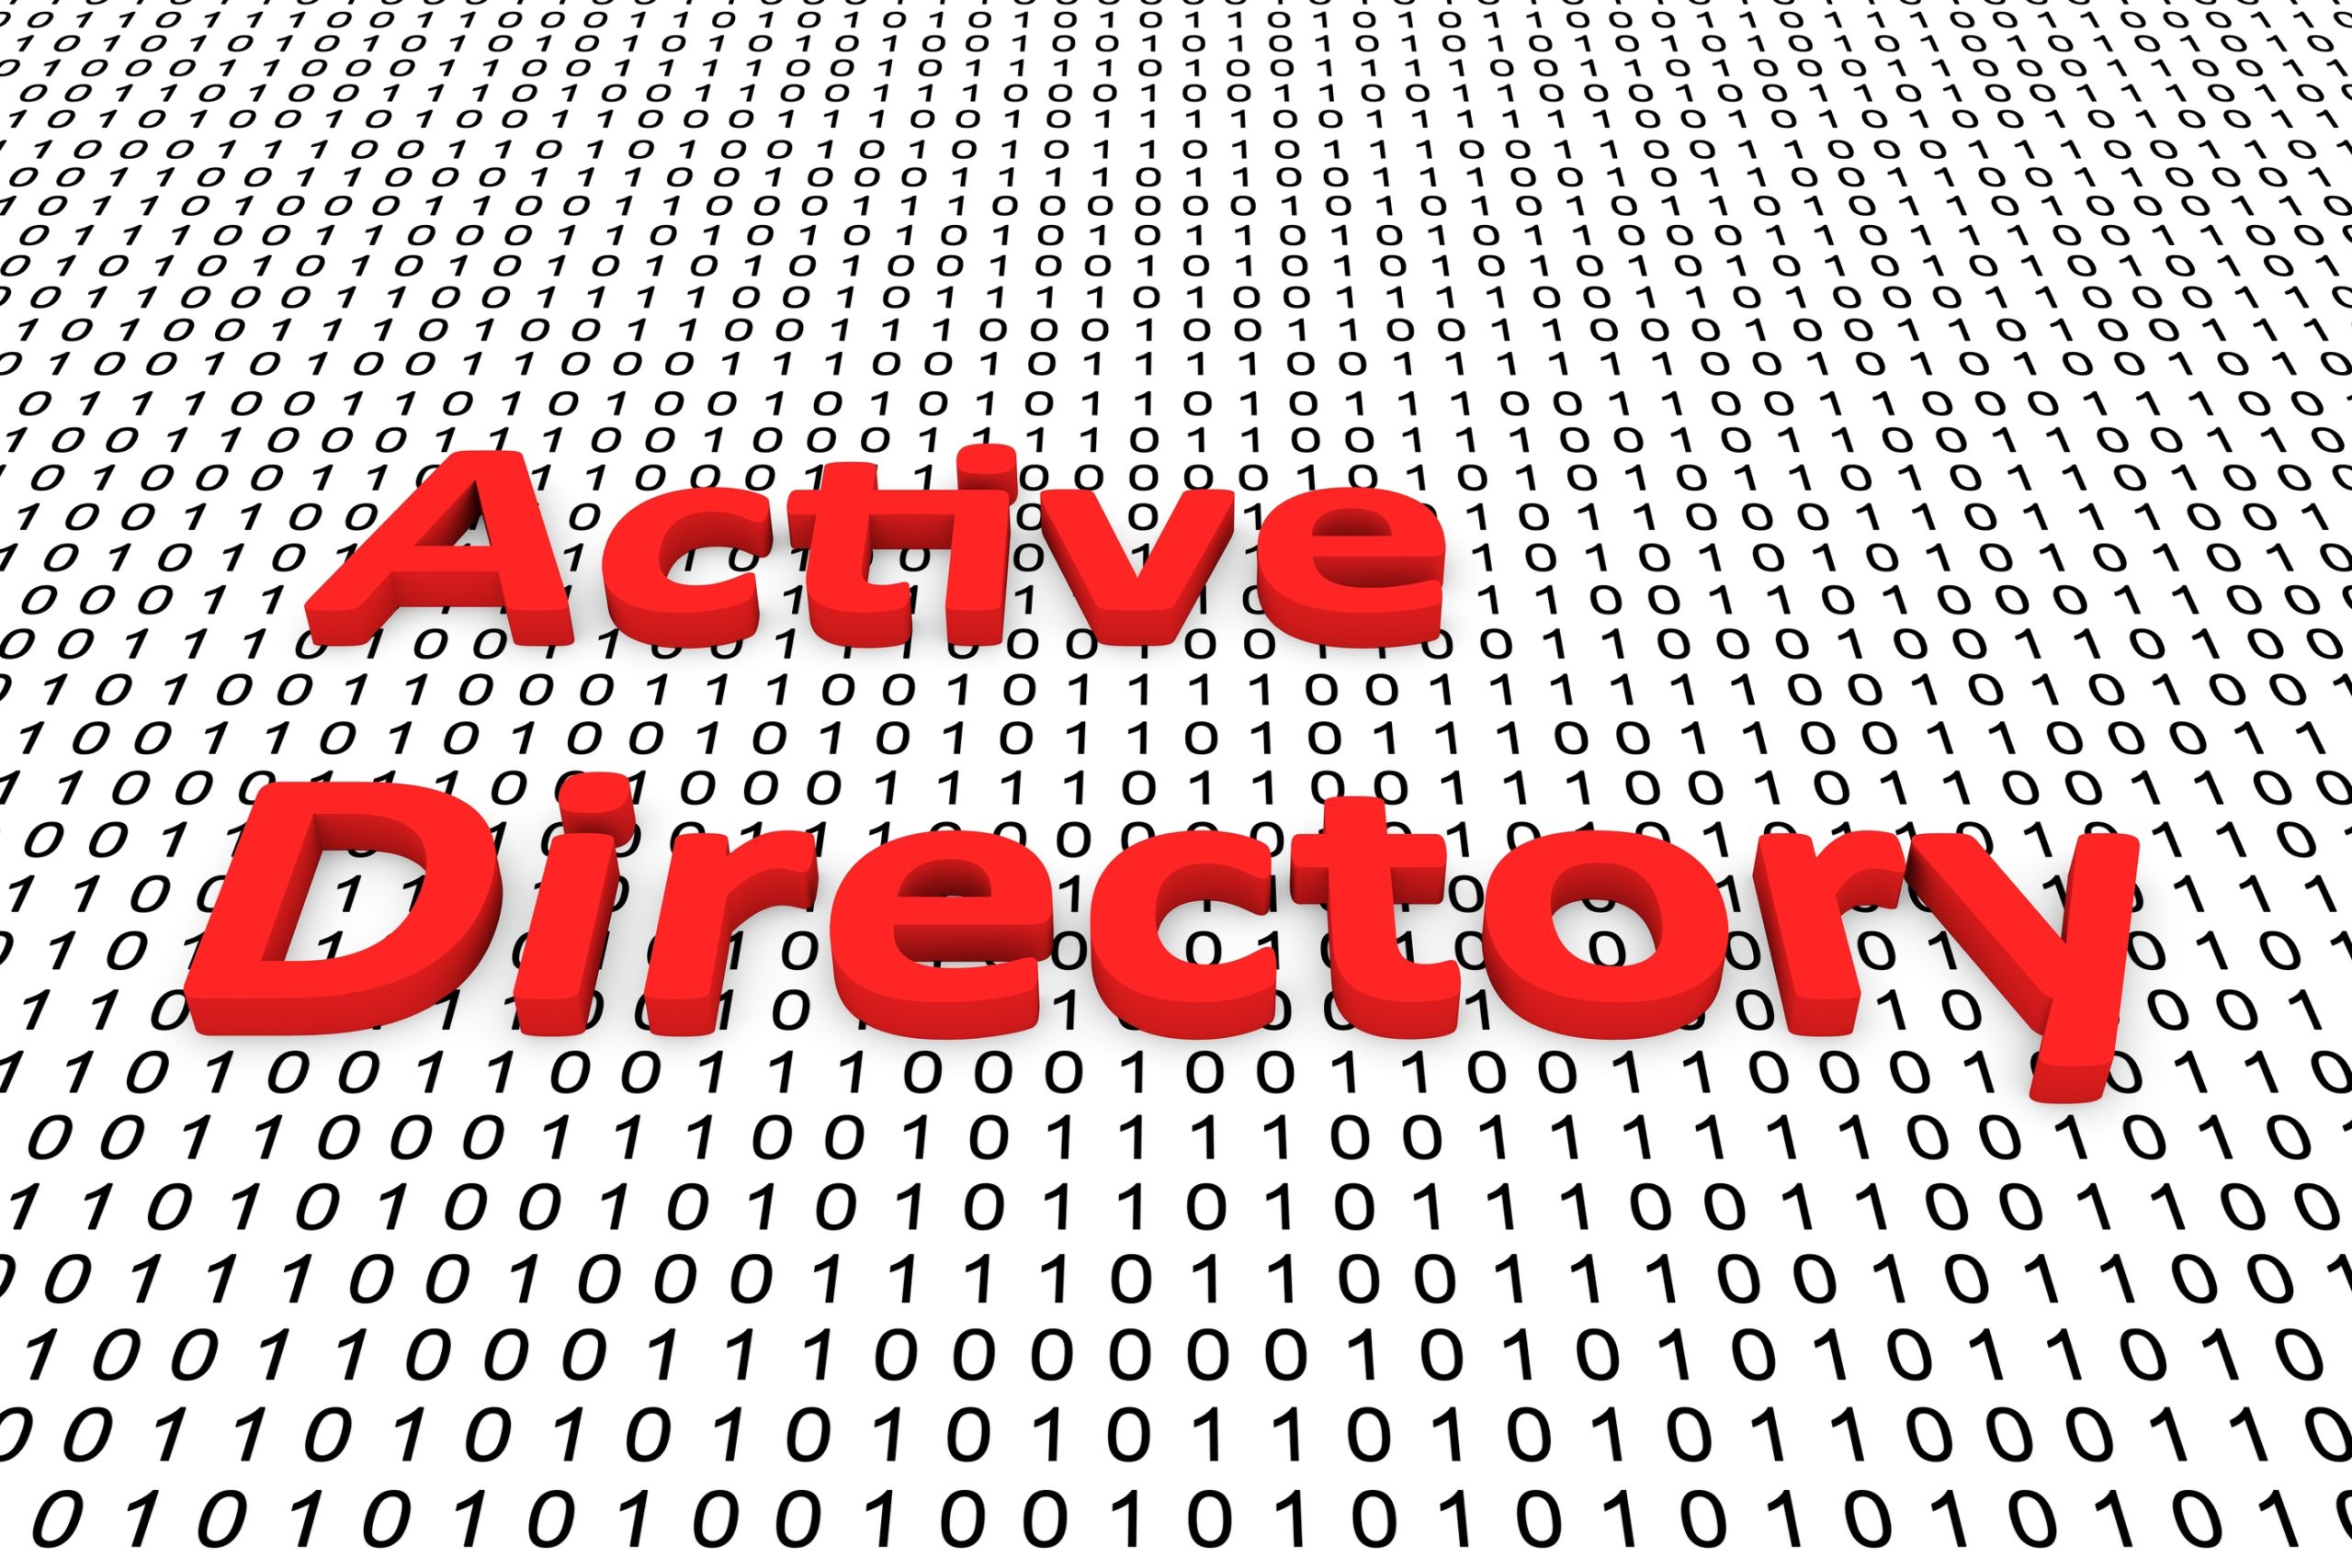 A New Affordable Active Directory Option Gives Small Businesses More Security Choices